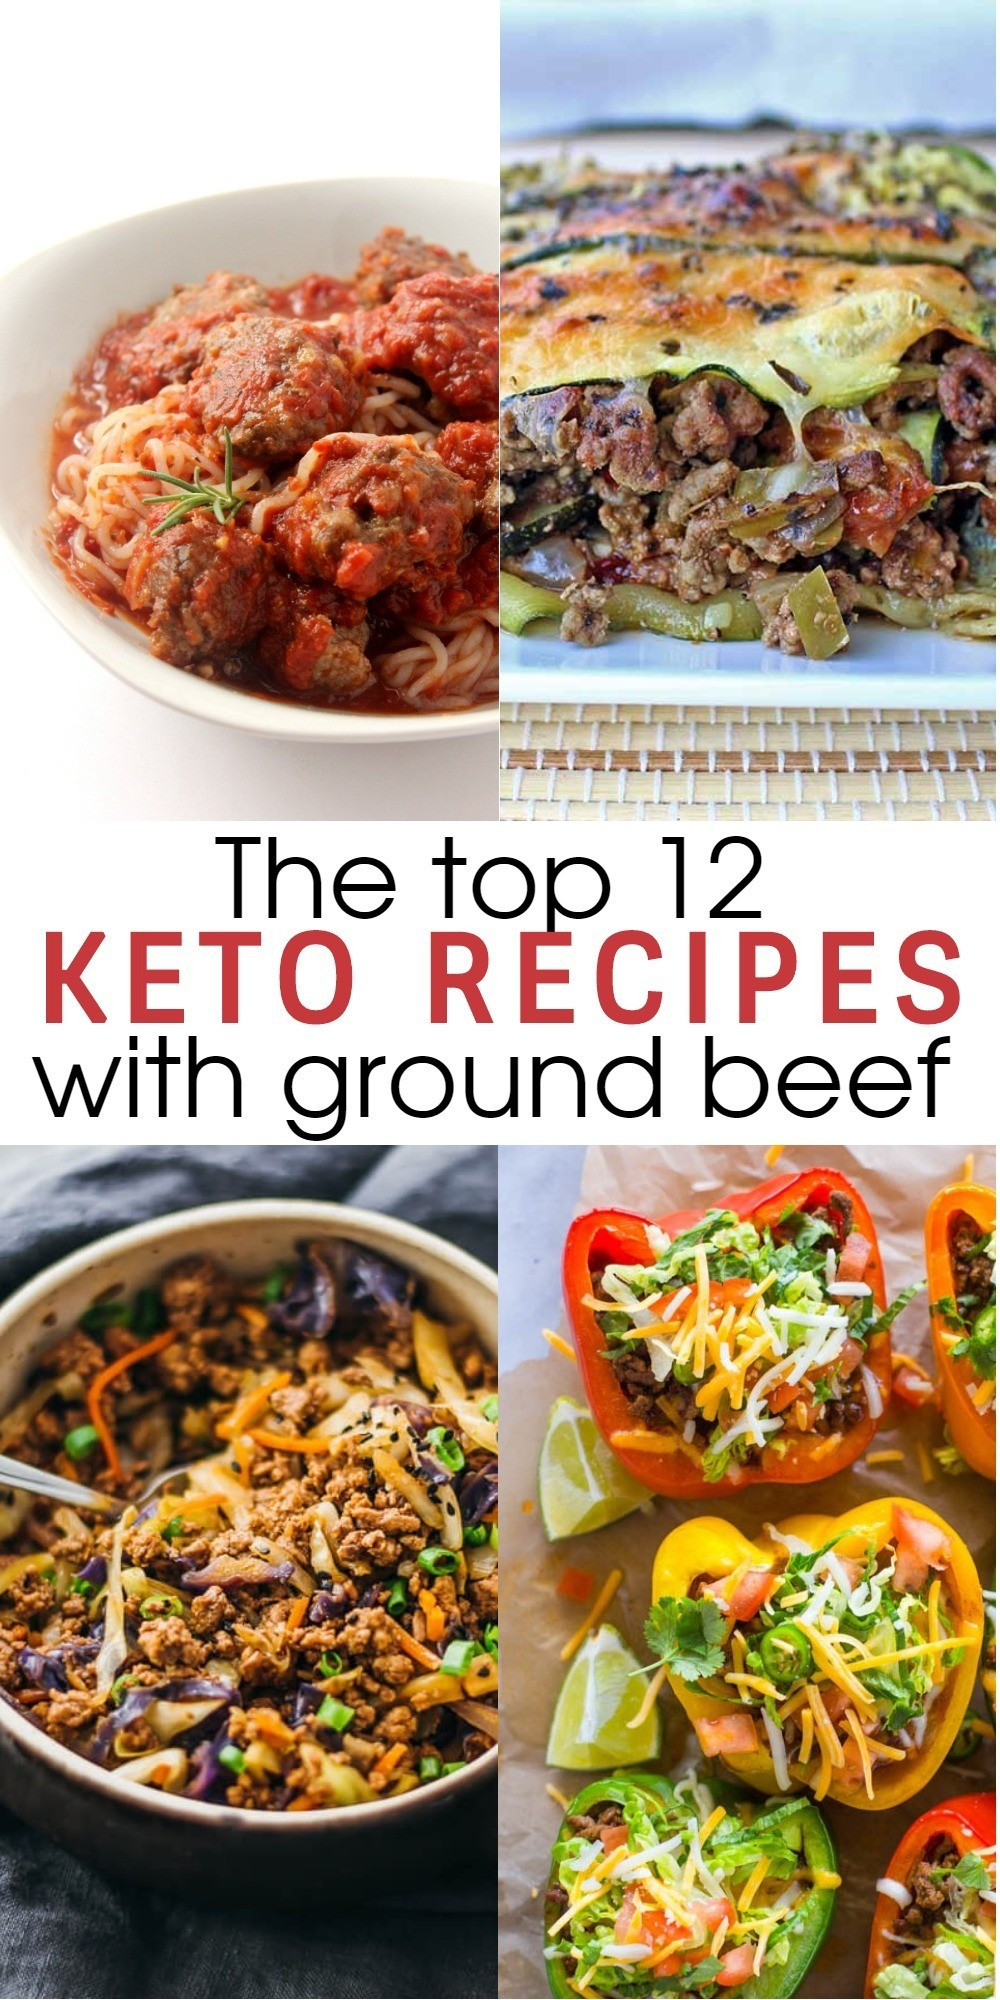 Ground Chicken Recipes Healthy Keto
 12 Flavorful and Easy Keto Recipes With Ground Beef To Try